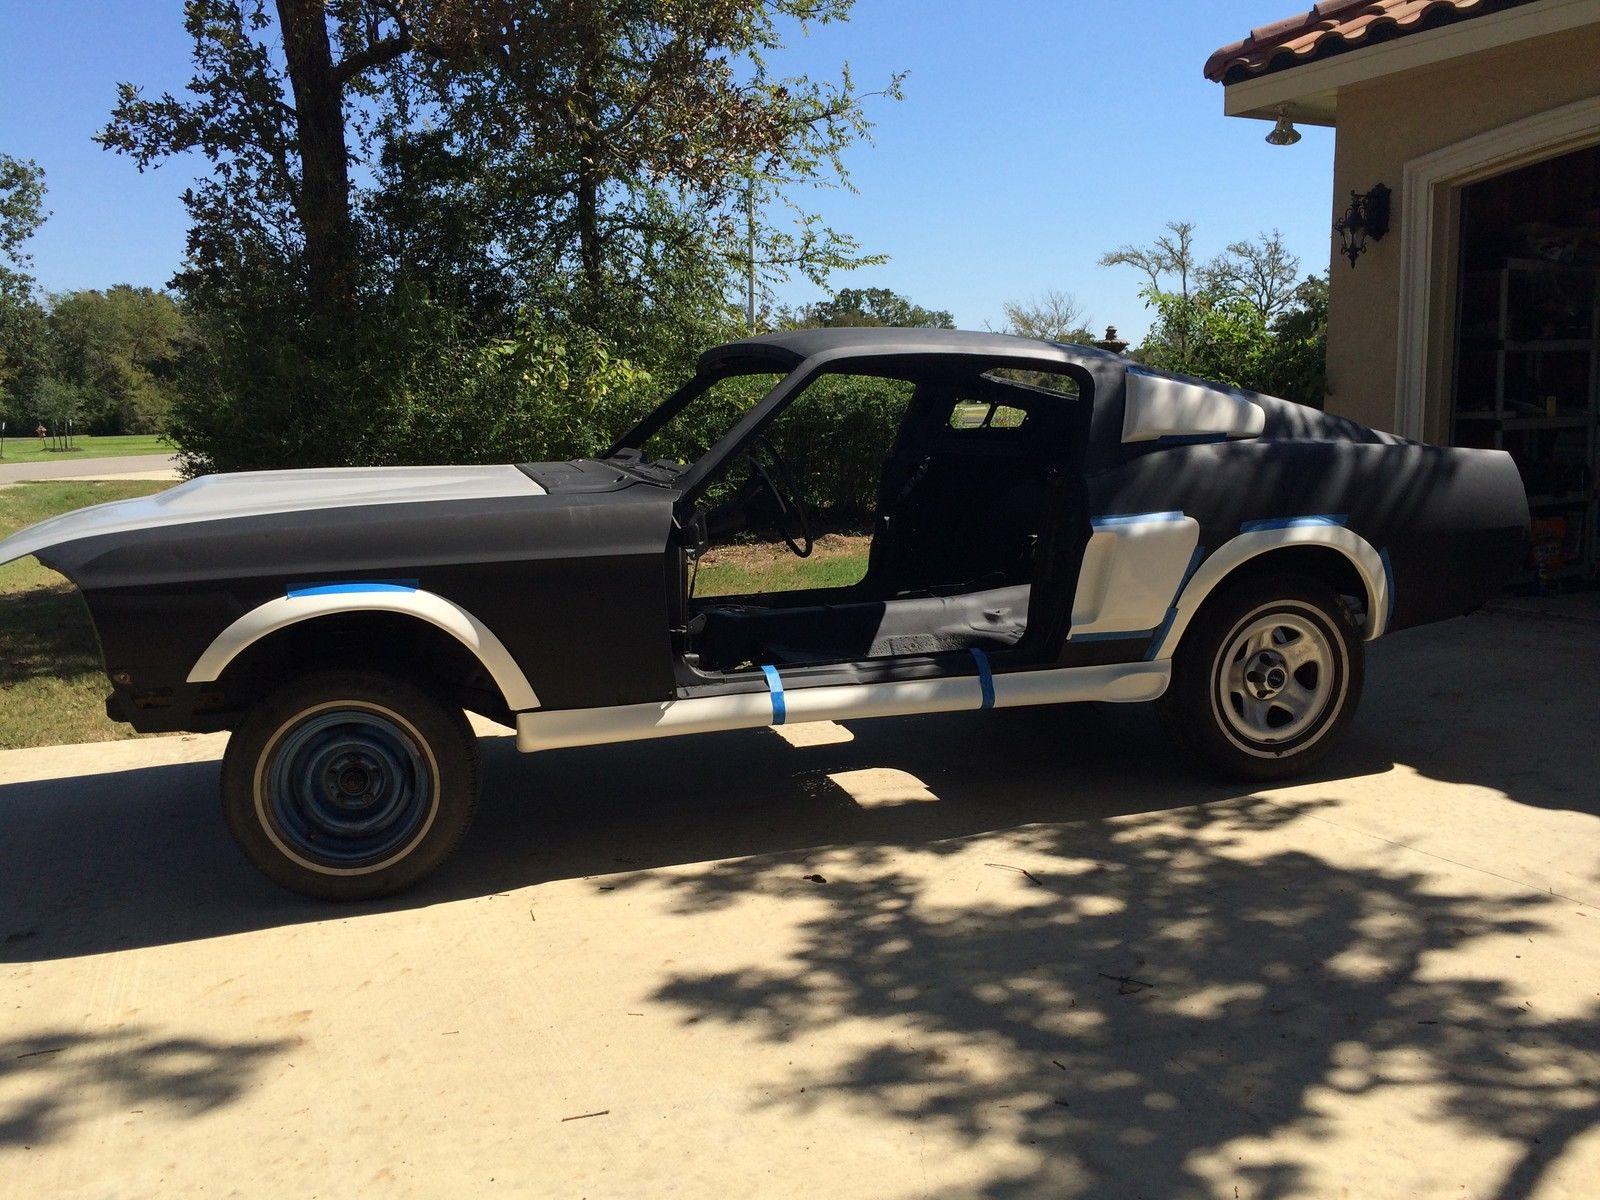 1968 Ford mustang project car #9